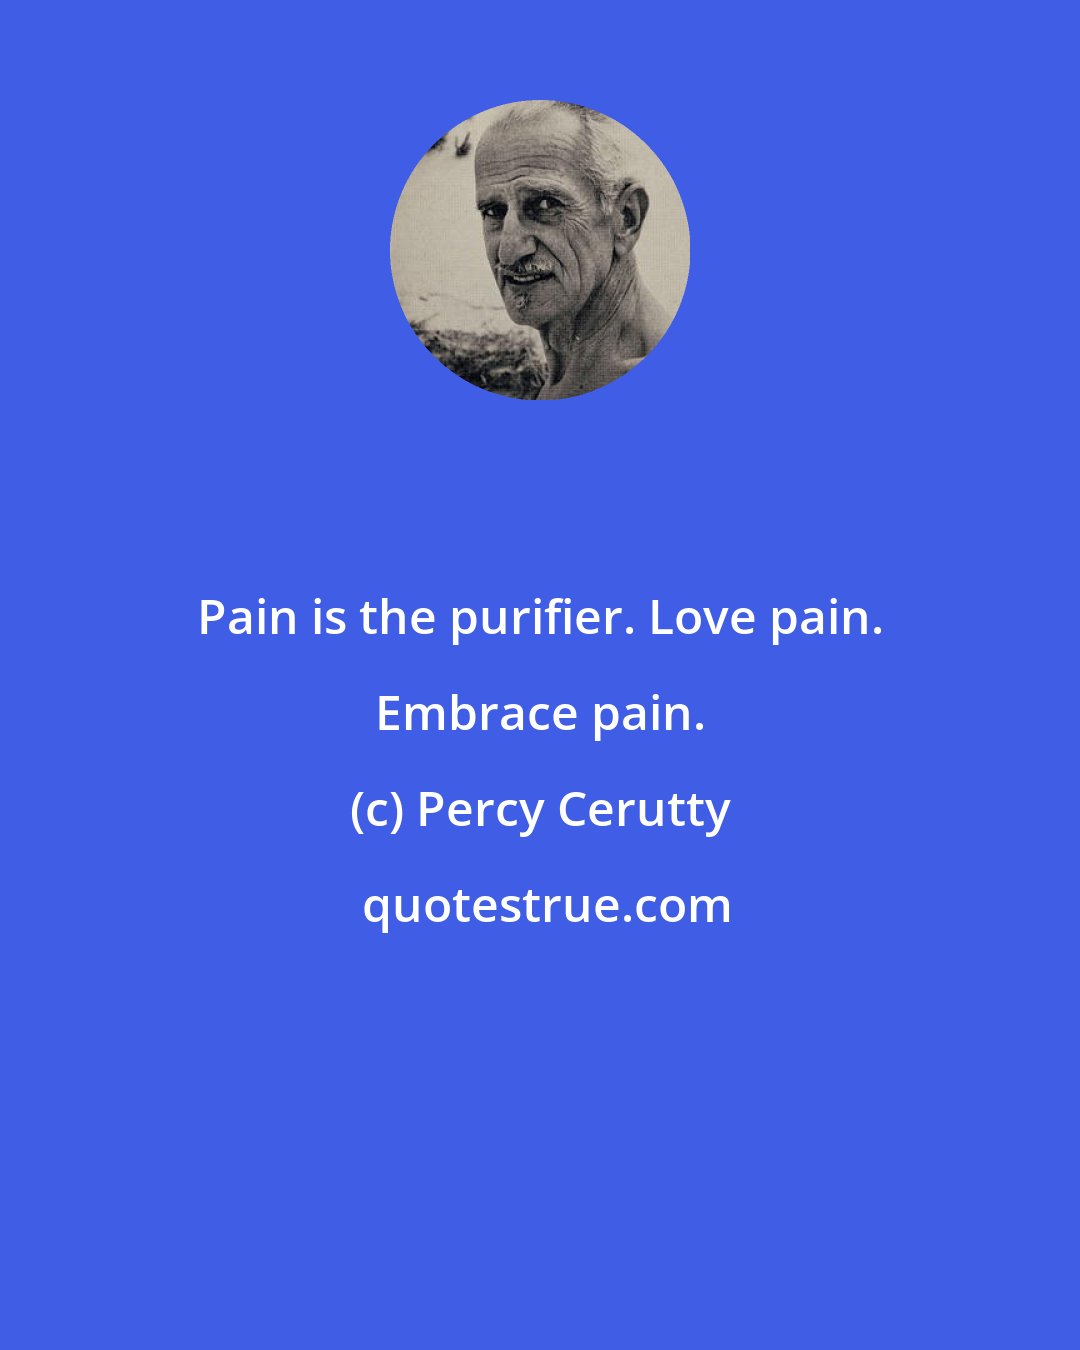 Percy Cerutty: Pain is the purifier. Love pain. Embrace pain.